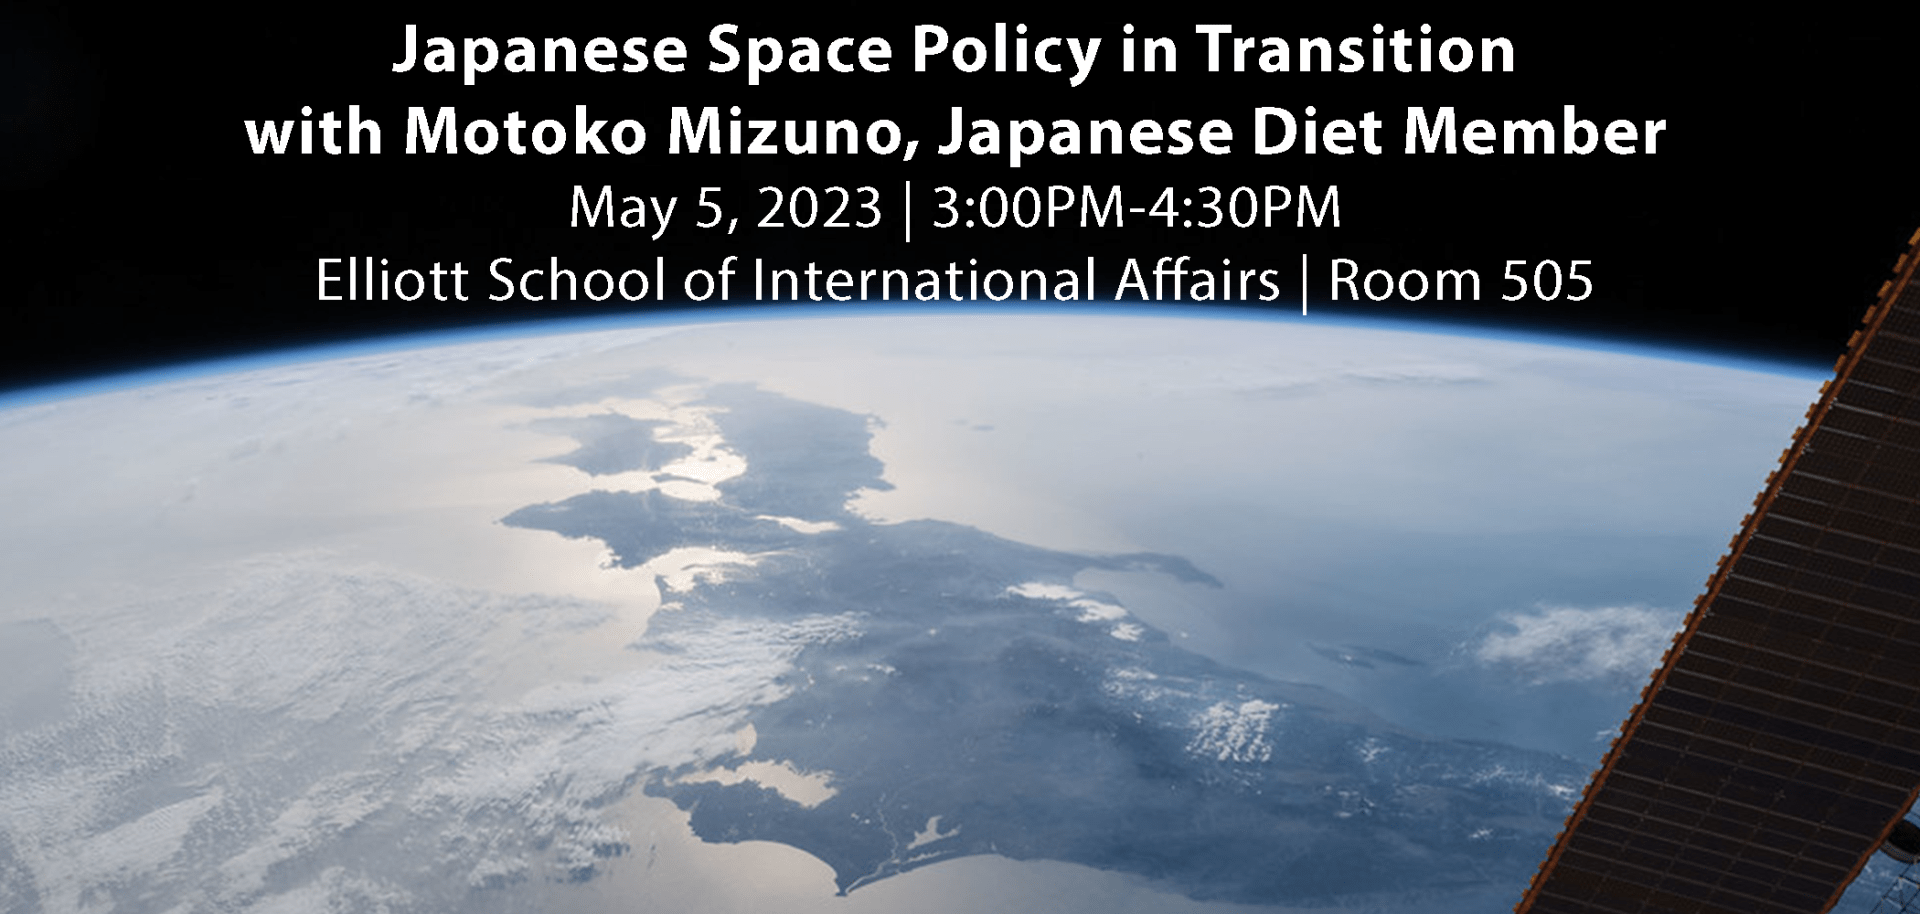 Japanese Space Policy in Transition with Motor Mizuno, Japanese Diet Member May 5, 2023 3-4:30PM Elliott School of International Affairs, Room 505